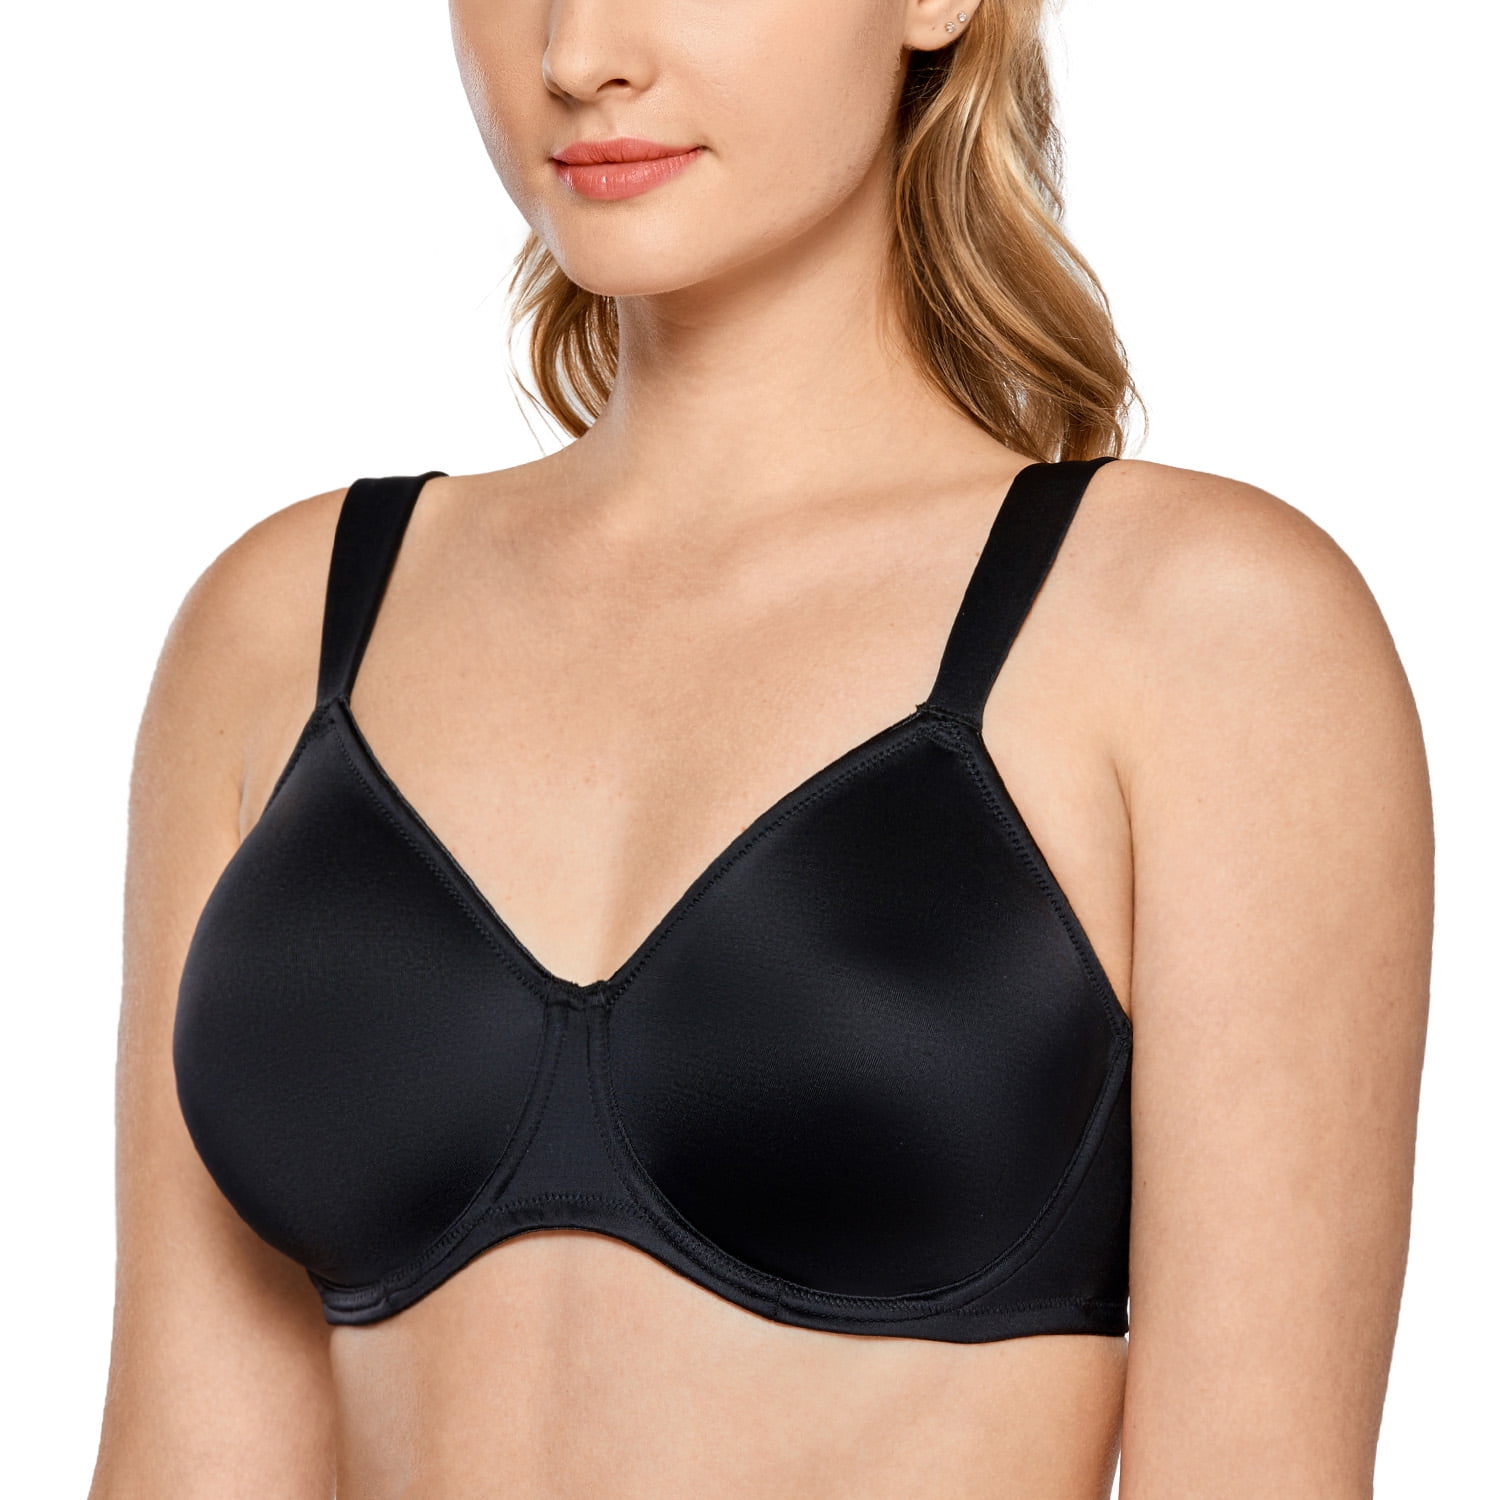 DELIMIRA Womens Non-Padded Minimizer Bra Full Coverage Smooth Underwire Plus Size